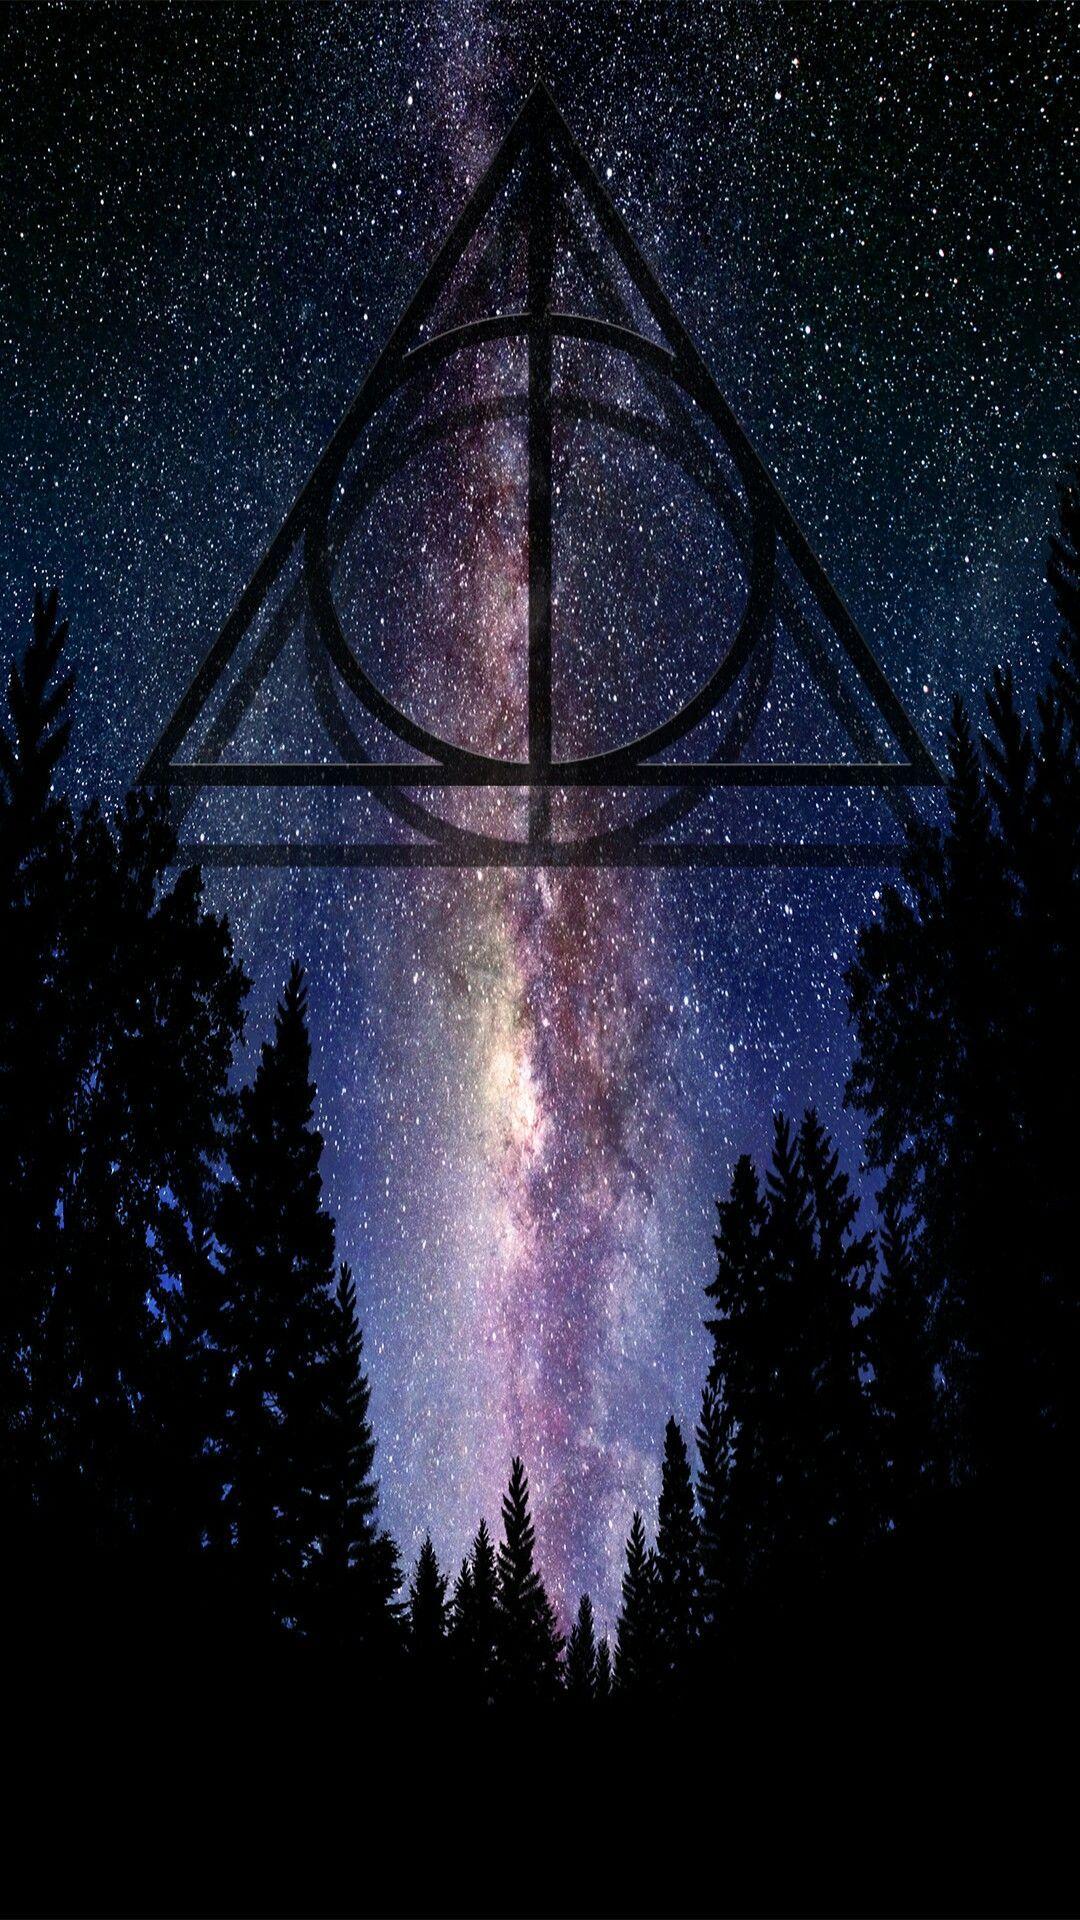 The deathly hallows. My new favorite series. HARRY POTTER